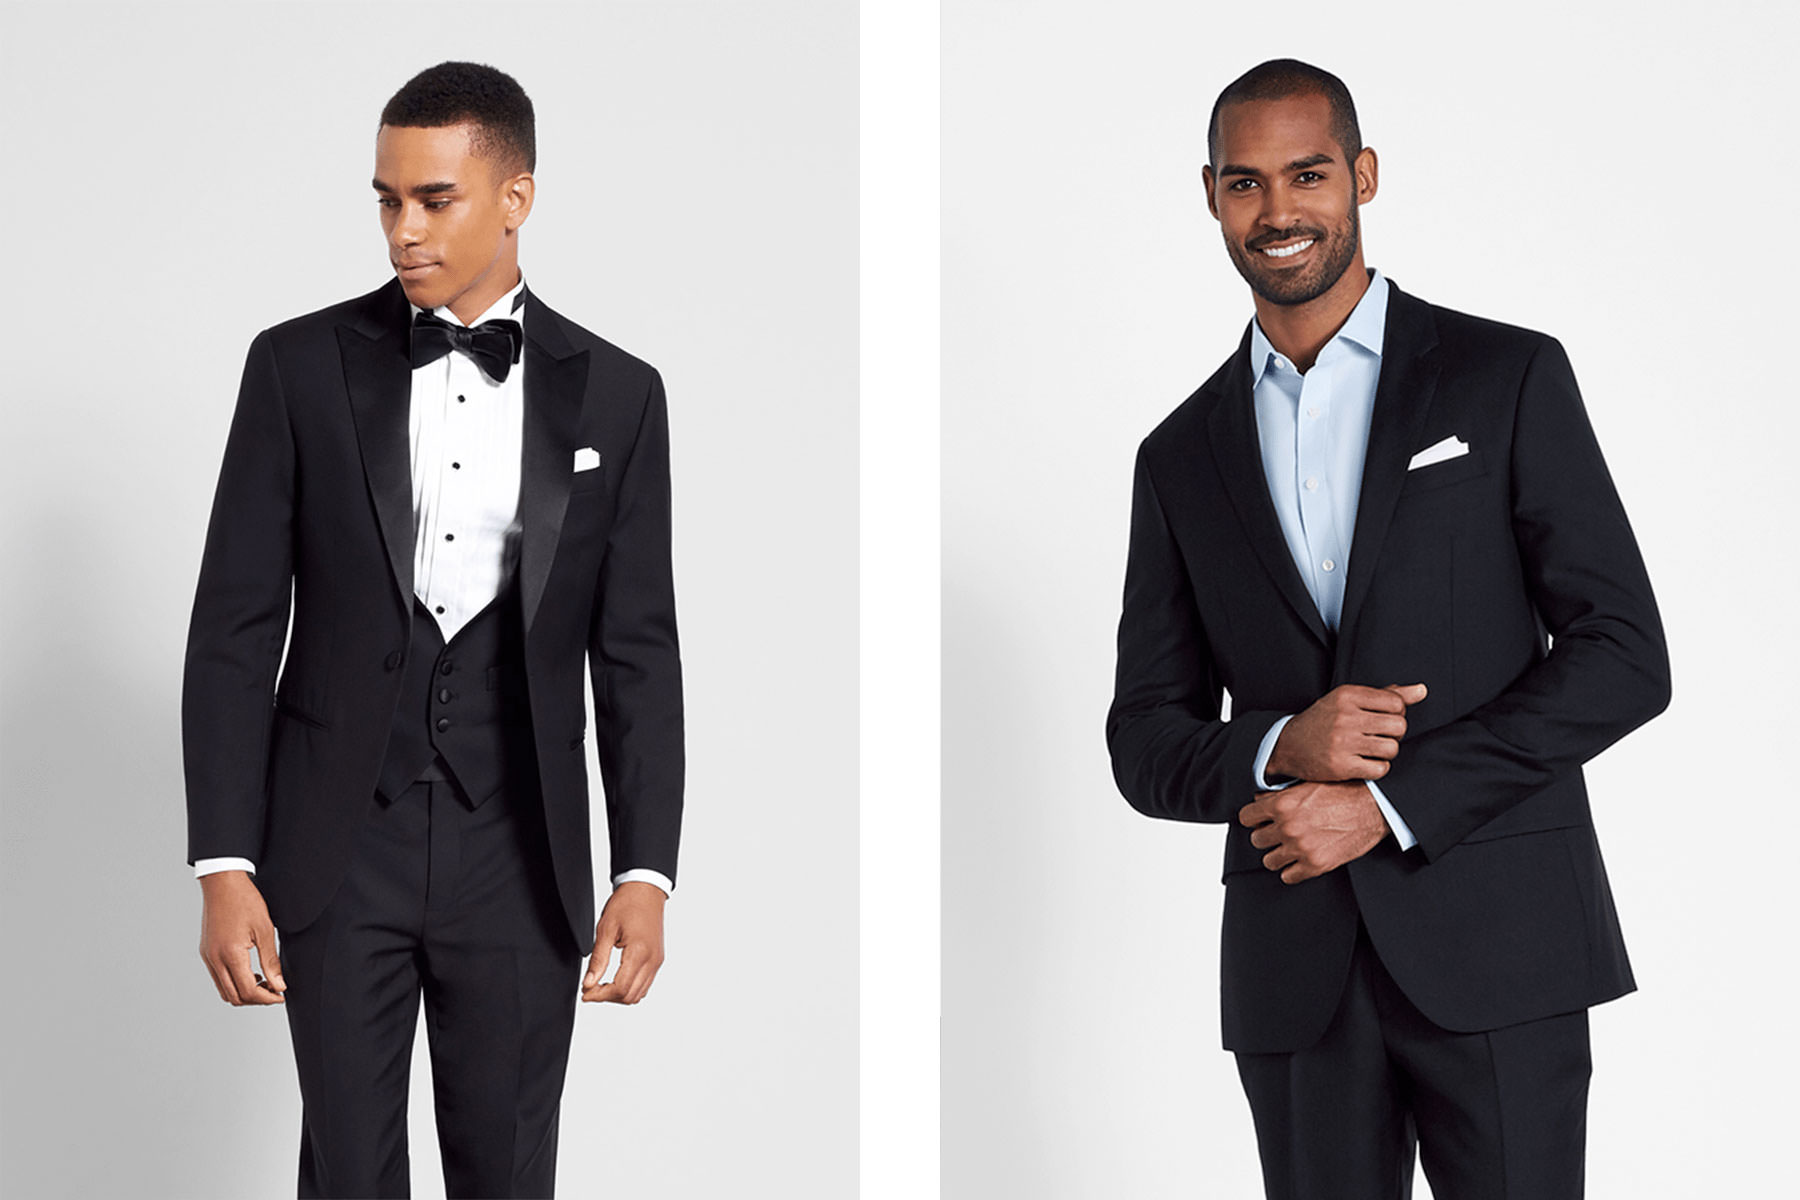 Tuxedo vs Suit: Which Should You Wear on Your Wedding Day in 2022?